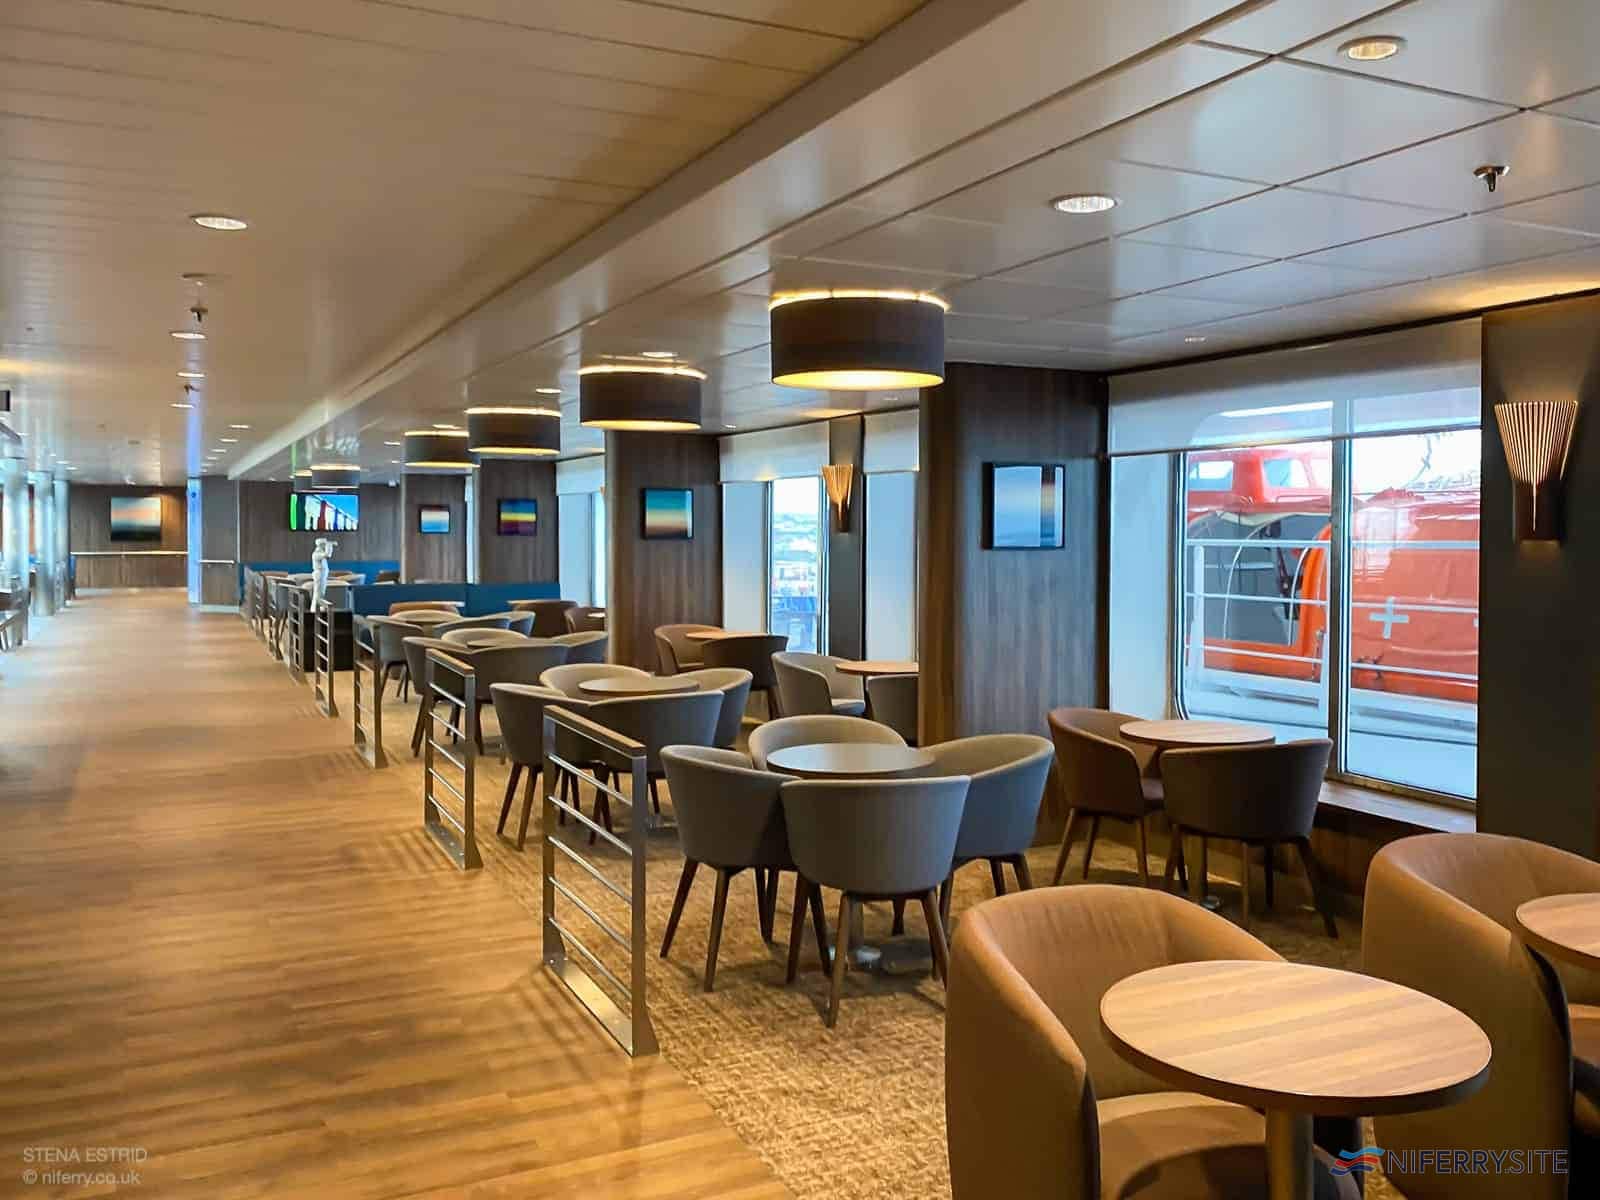 Some of the portside seating in the Sky Bar, Deck 8. © NIFerry.co.uk